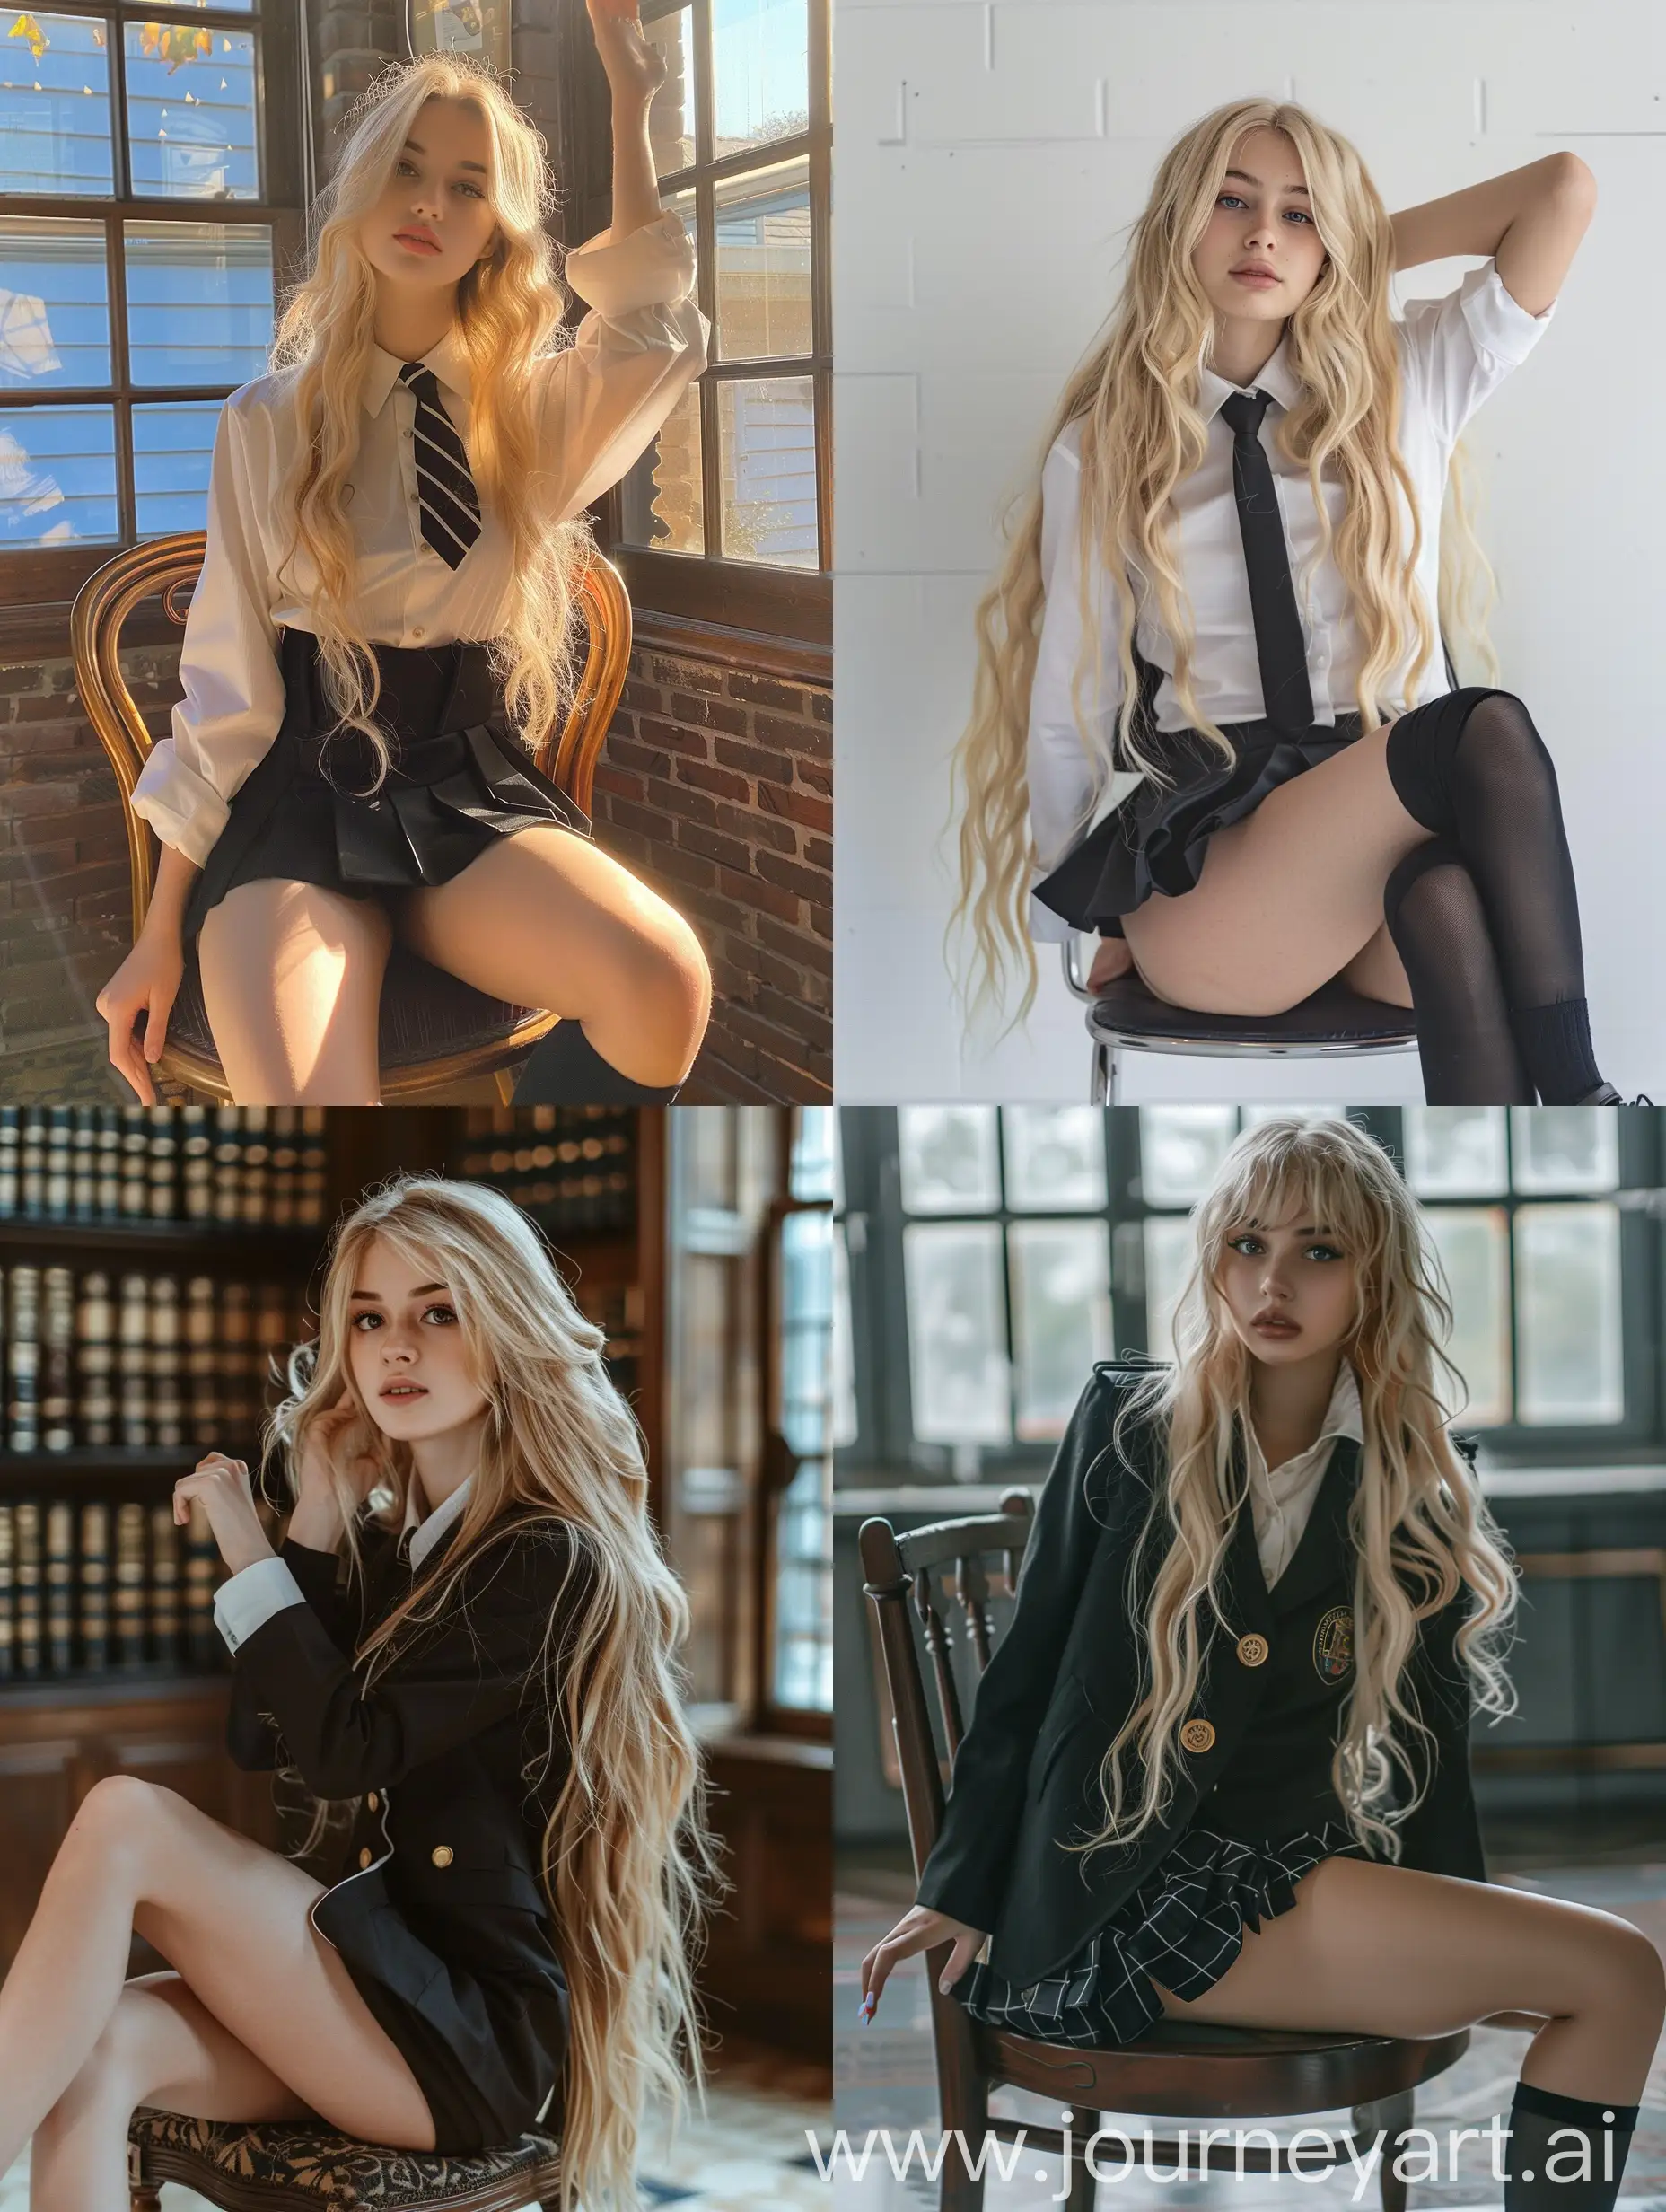 1 girl, long blond hair, 18 years old, influencer, beauty,   in the school,  school uniform, makeup, , fullbody, fitness, sitting on chair, raised knee